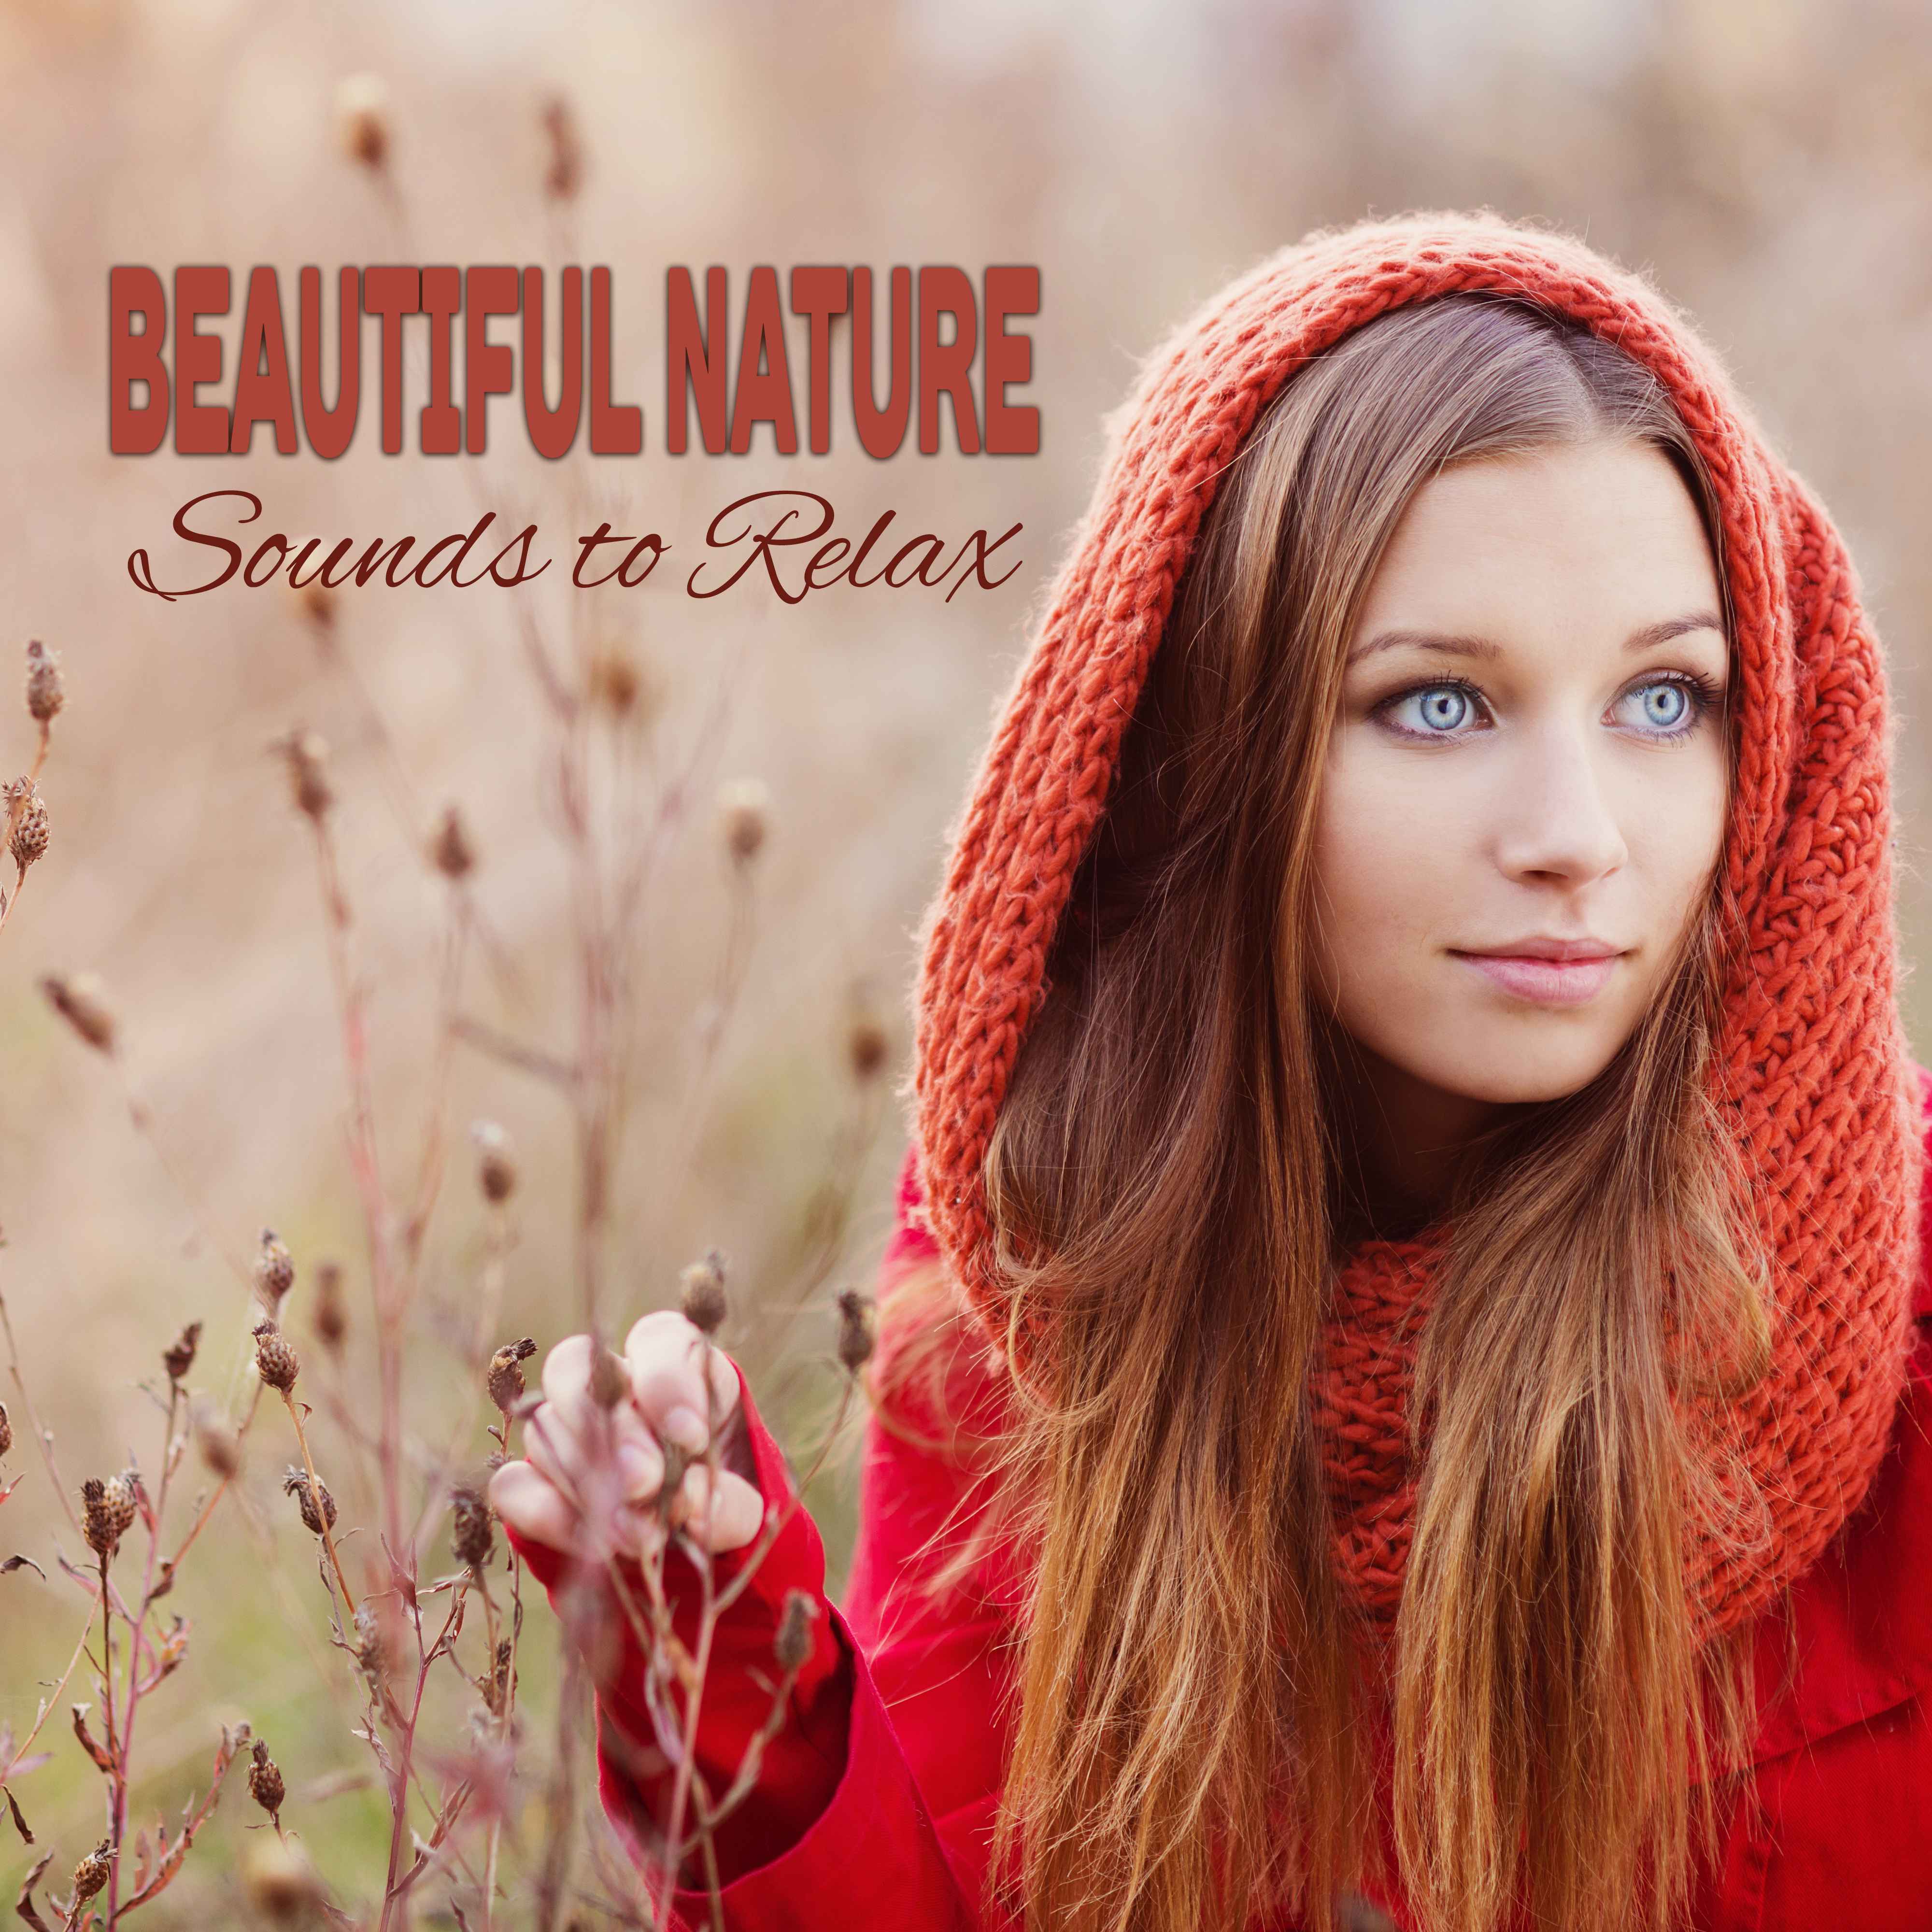 Beautiful Nature Sounds to Relax – Nature Vibes to Relax, Soft Songs to Calm Down, Peaceful Music